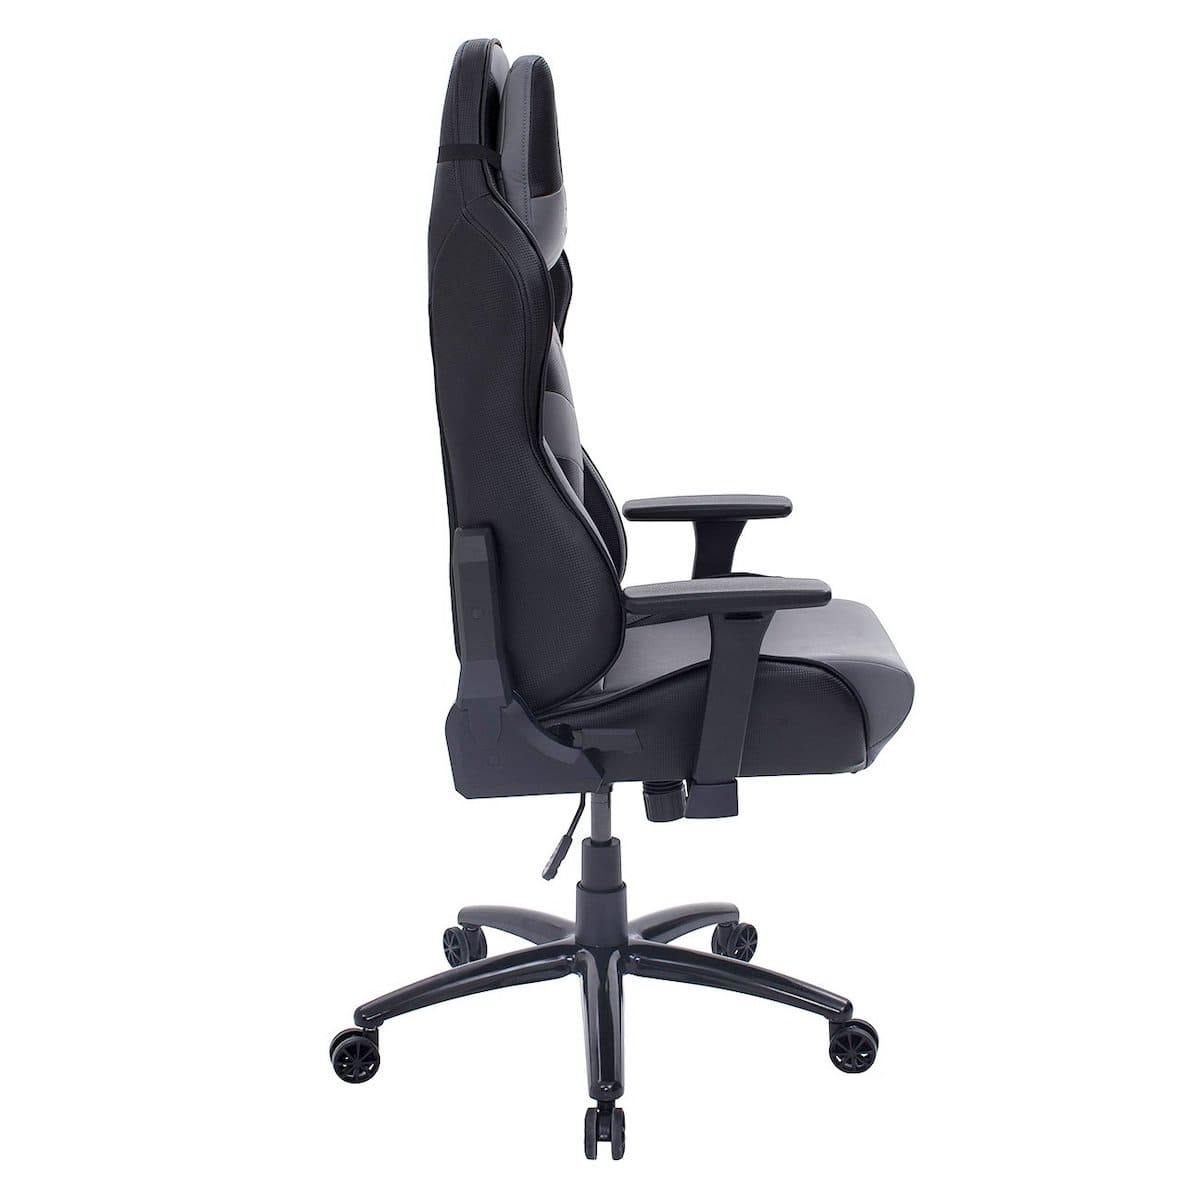 Techni Sport TS-61 Gray Ergonomic High Back Racer Style Video Gaming Chair RTA-TS61-GRY-BK Side #color_gray